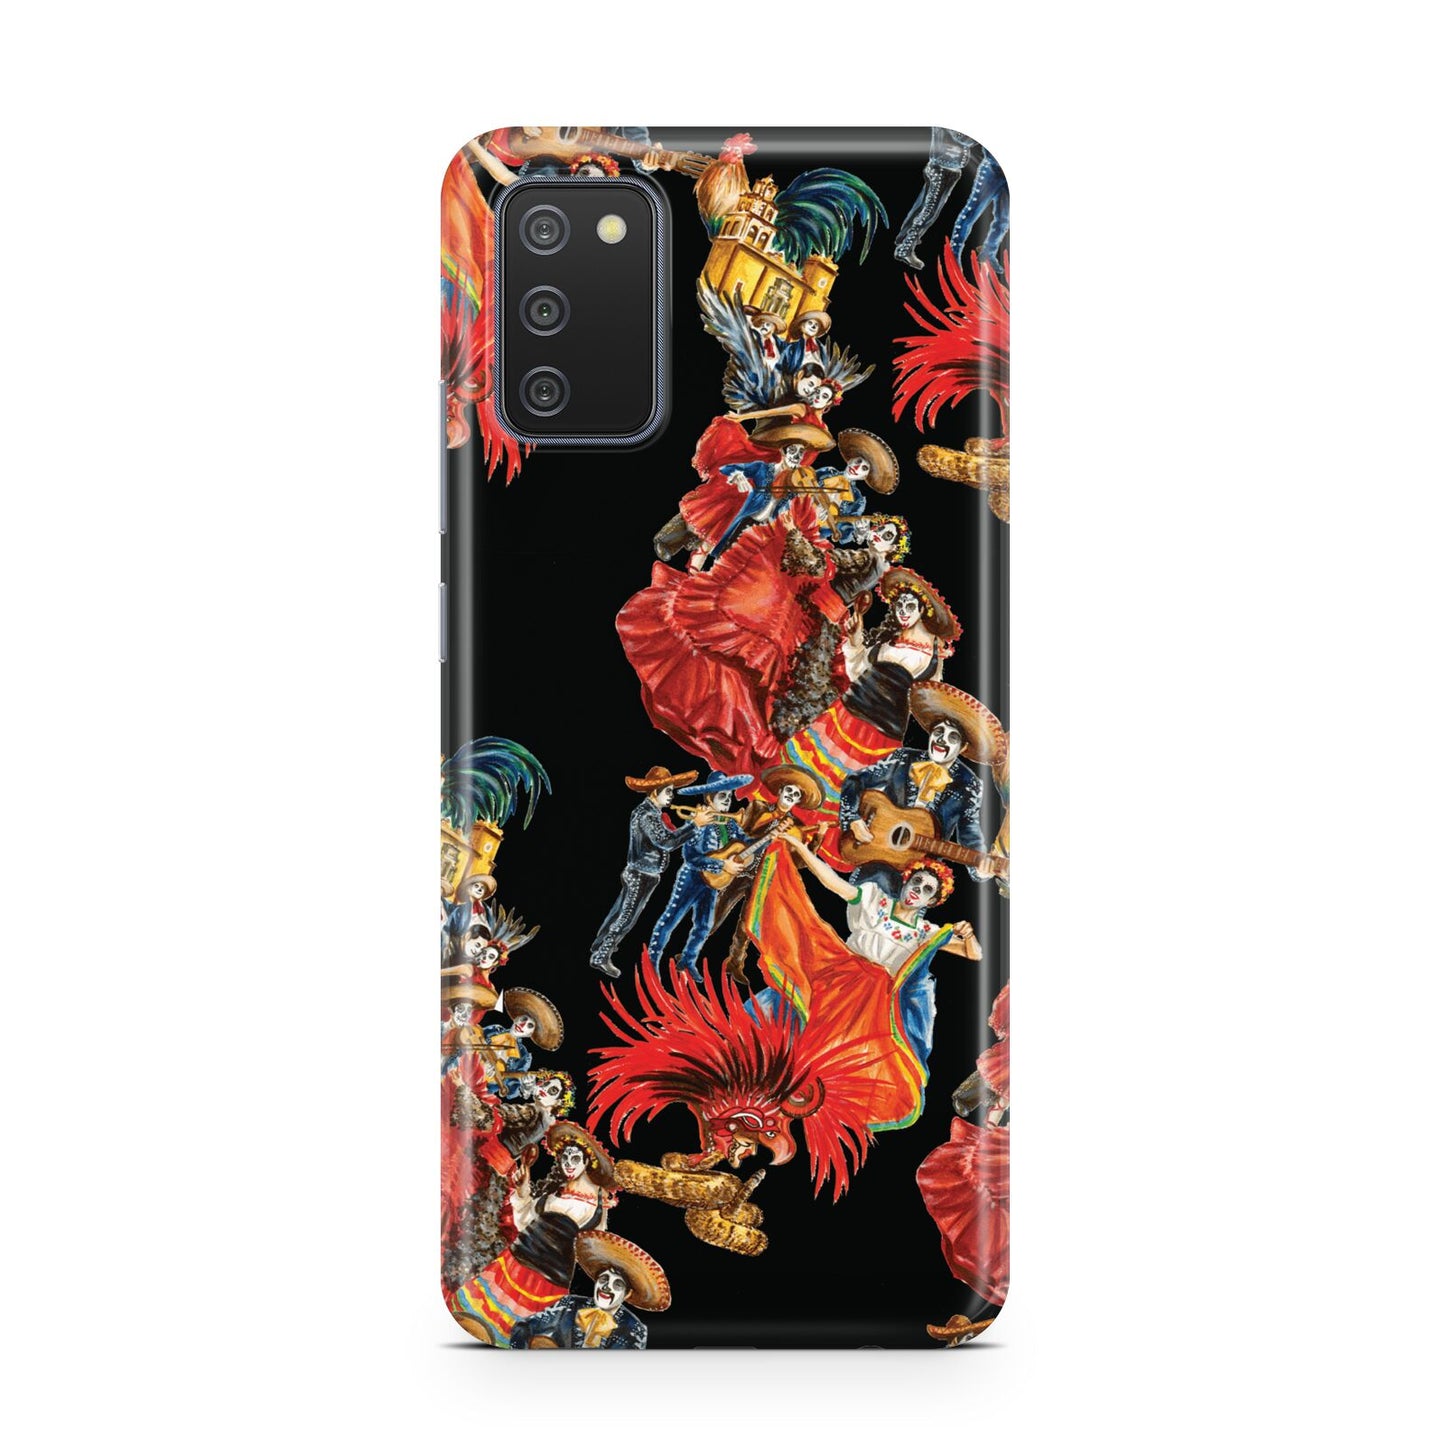 Day of the Dead Festival Samsung A02s Case